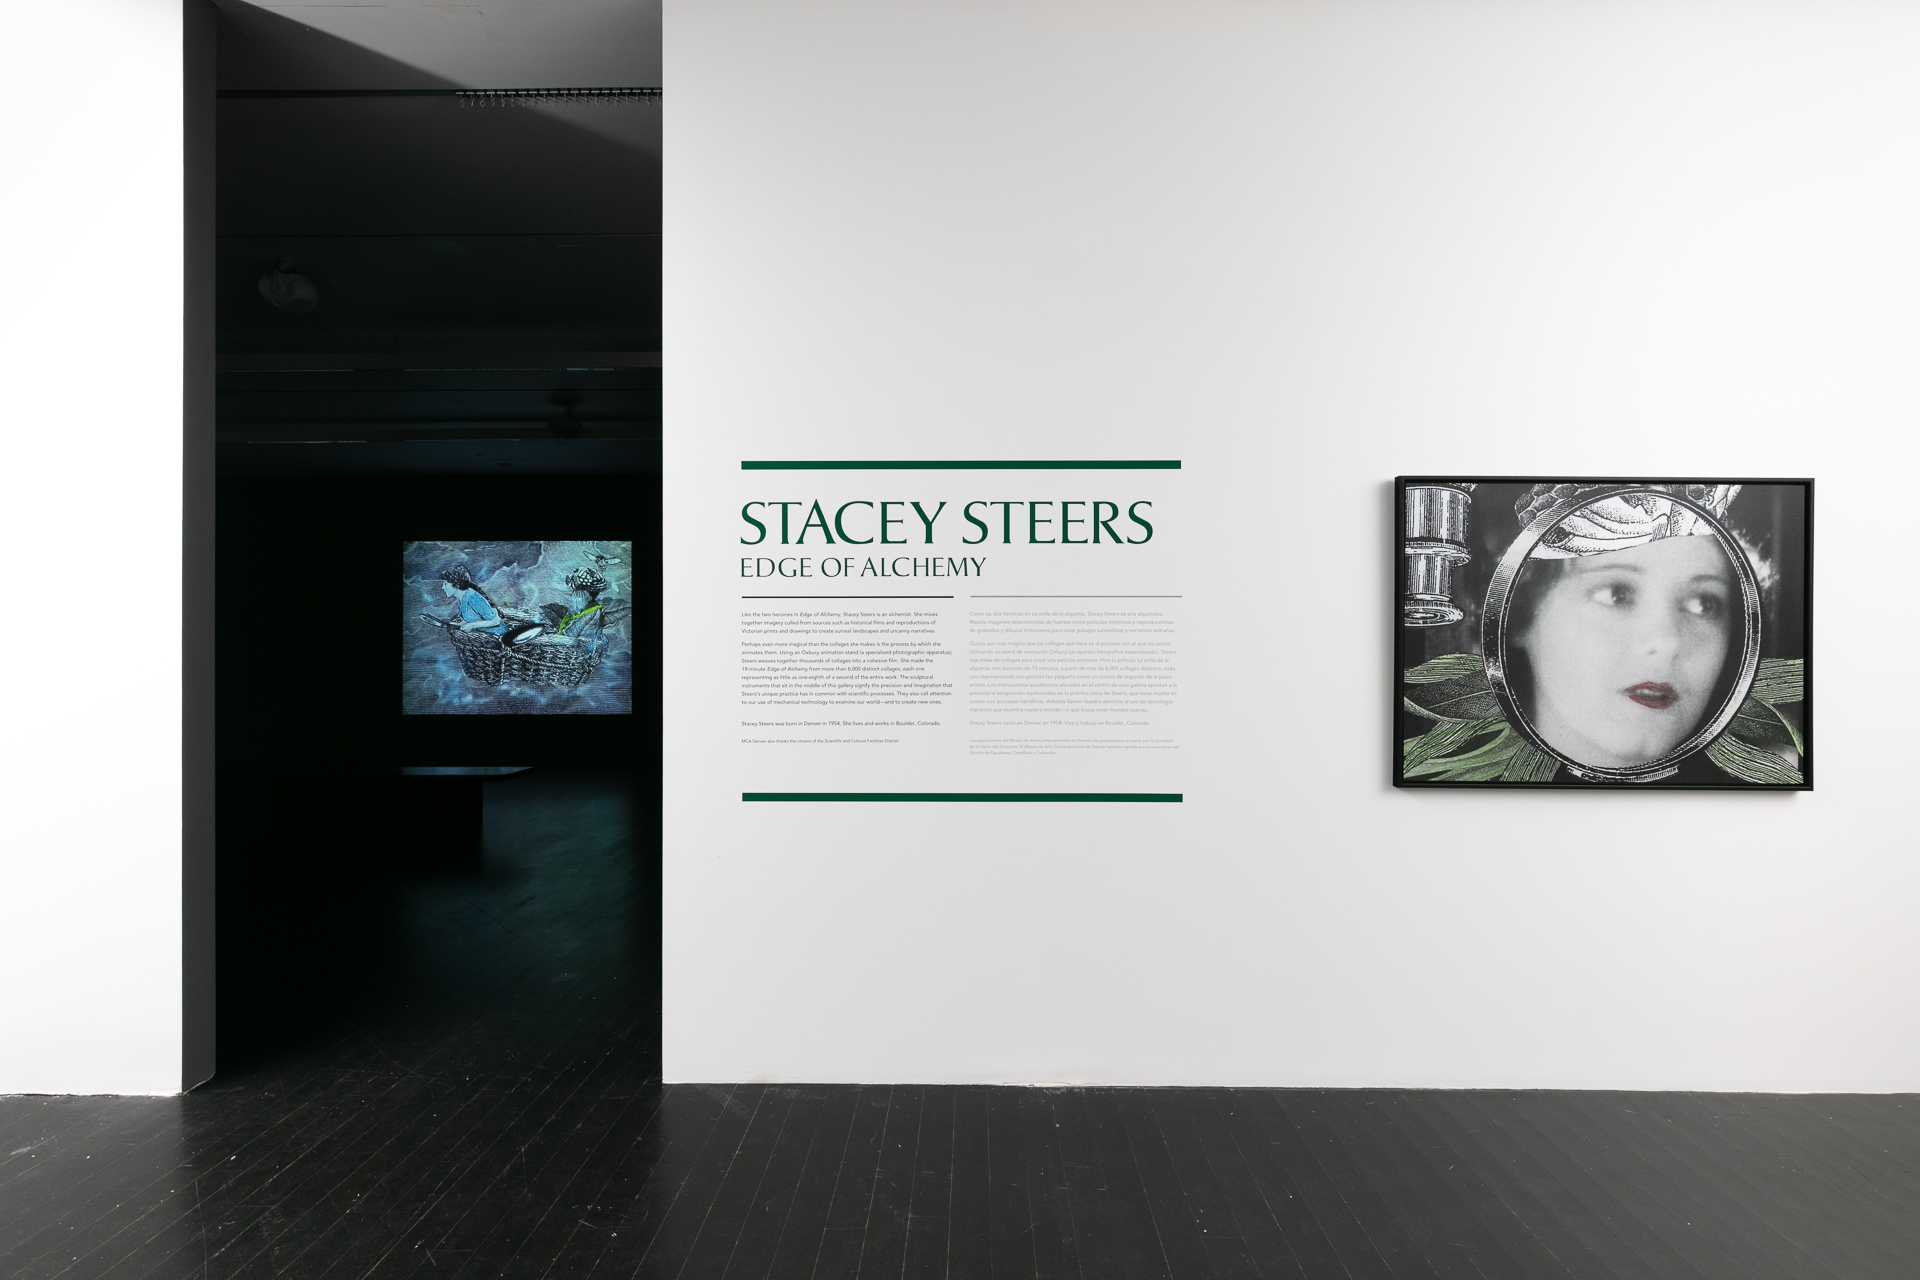 Gallery shot of wall text reading “STACEY STEERS EDGE OF ALCHEMY.” Adjacent is a black and white portrait of a woman looking wistfully off frame. In the background is a projection of an animation.